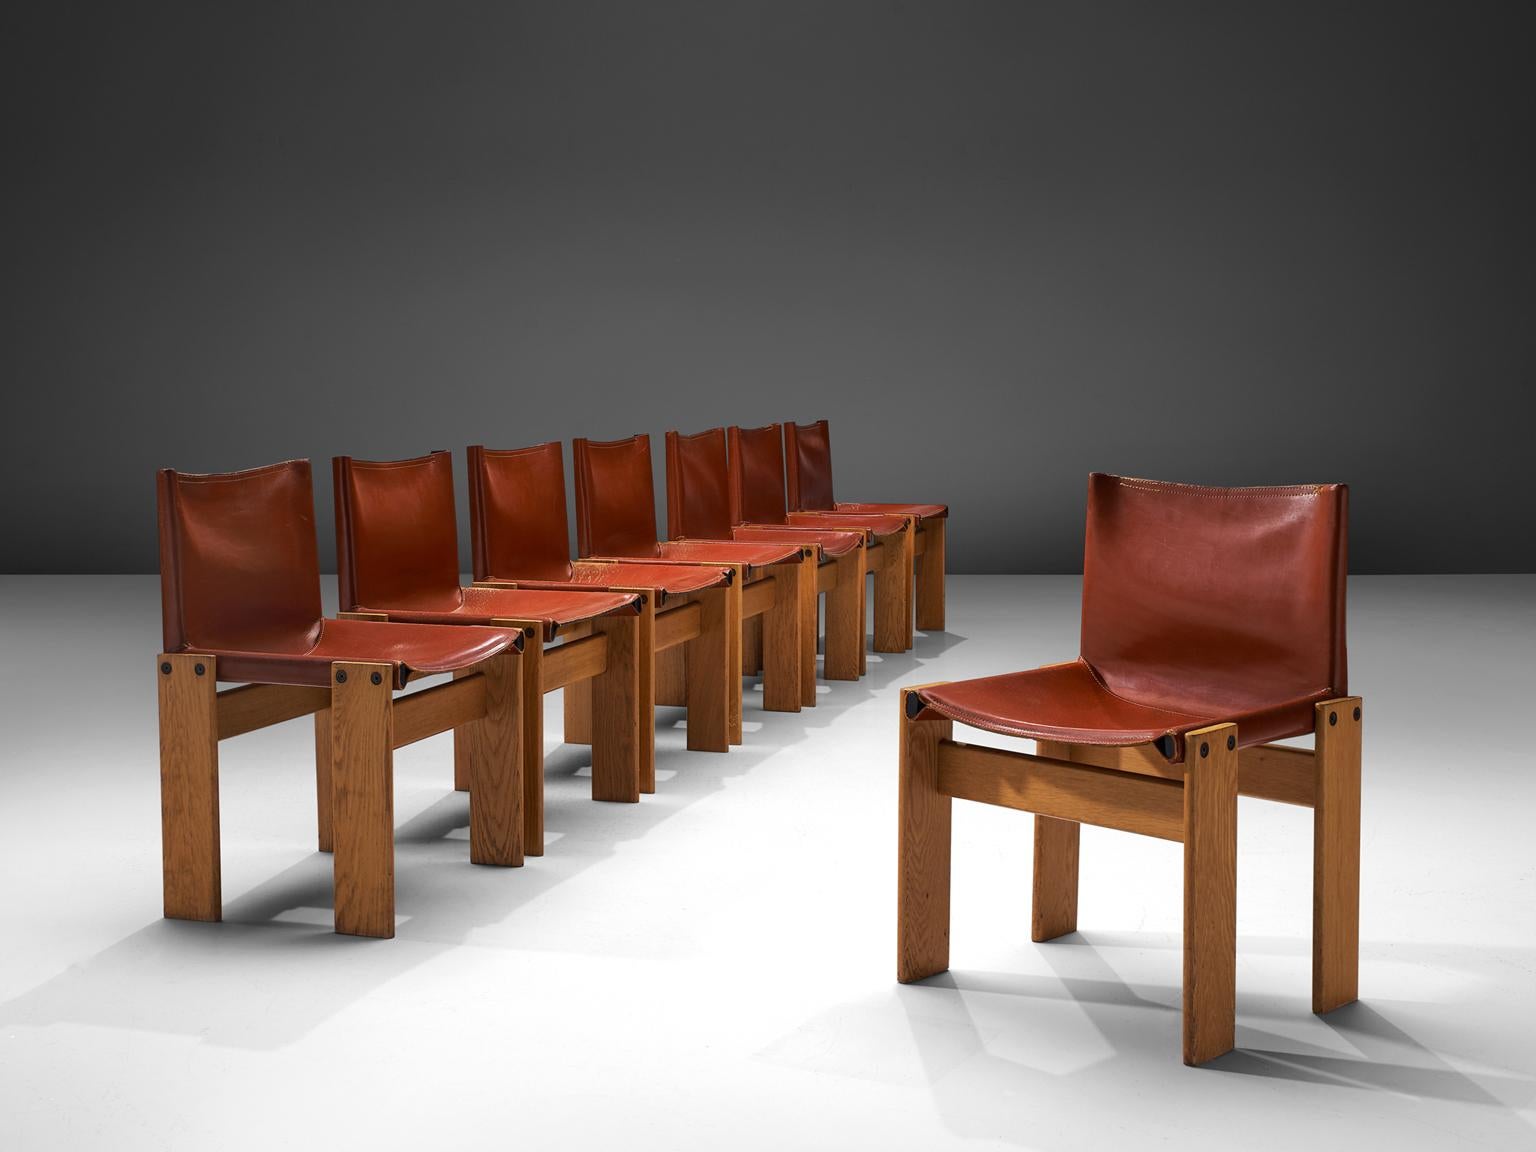 Afra & Tobia Scarpa for Molteni, monk set of eight dining chairs, patinated beech and terracotta leather, Italy, 1974.

The wonderfully warm red leather forms a striking combination with the blond wood. Interesting is the 'flat' shape of this